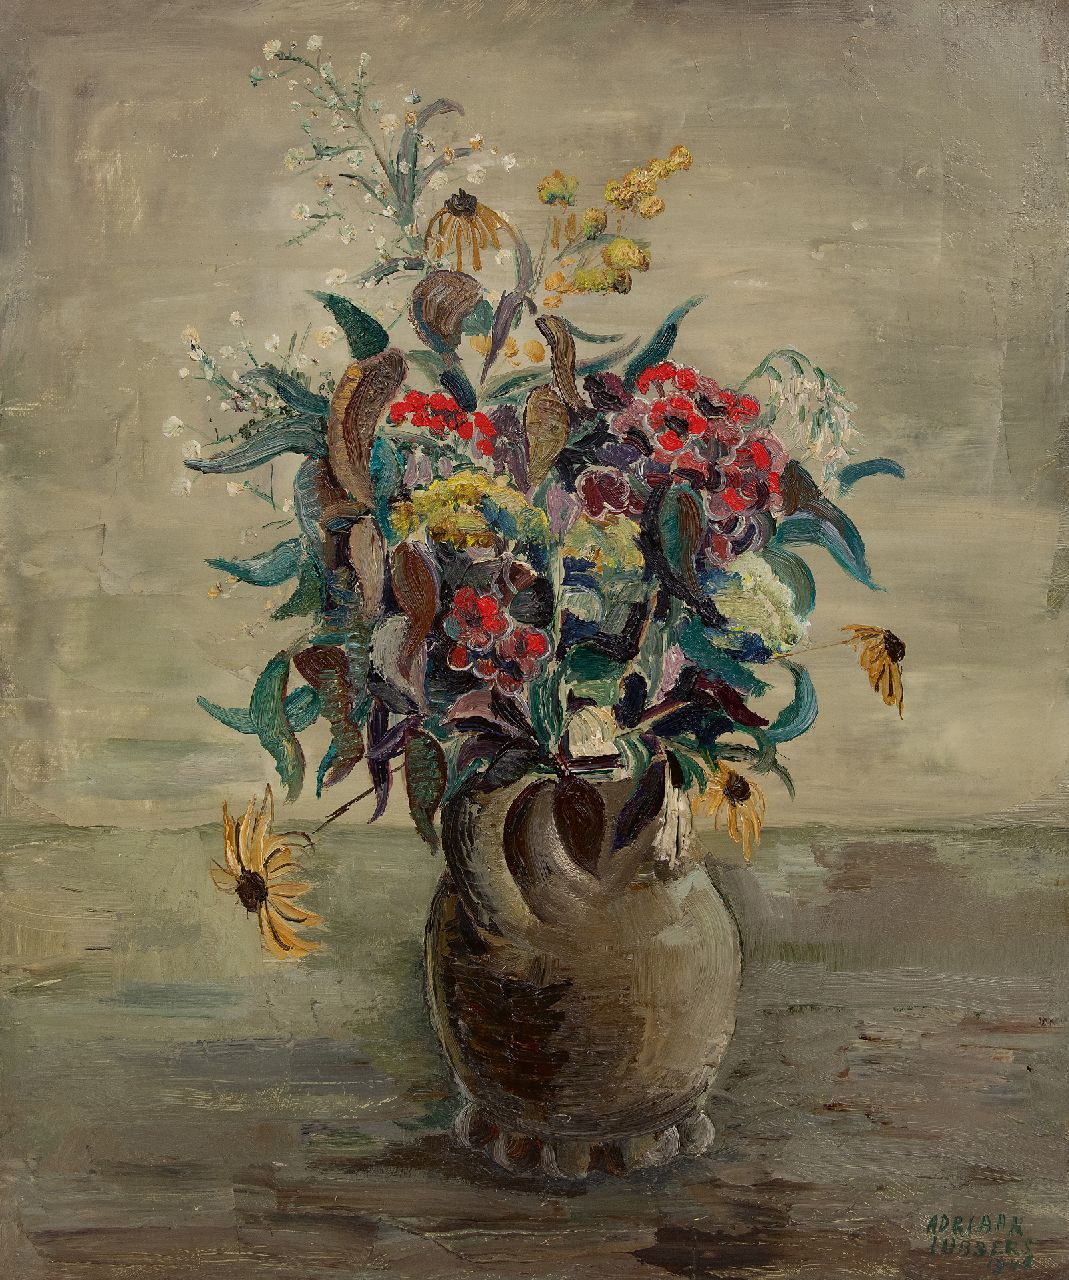 Lubbers A.  | Adriaan Lubbers | Paintings offered for sale | Flower still life in earthenware vase, oil on canvas 60.0 x 50.3 cm, signed l.r. and dated 1946